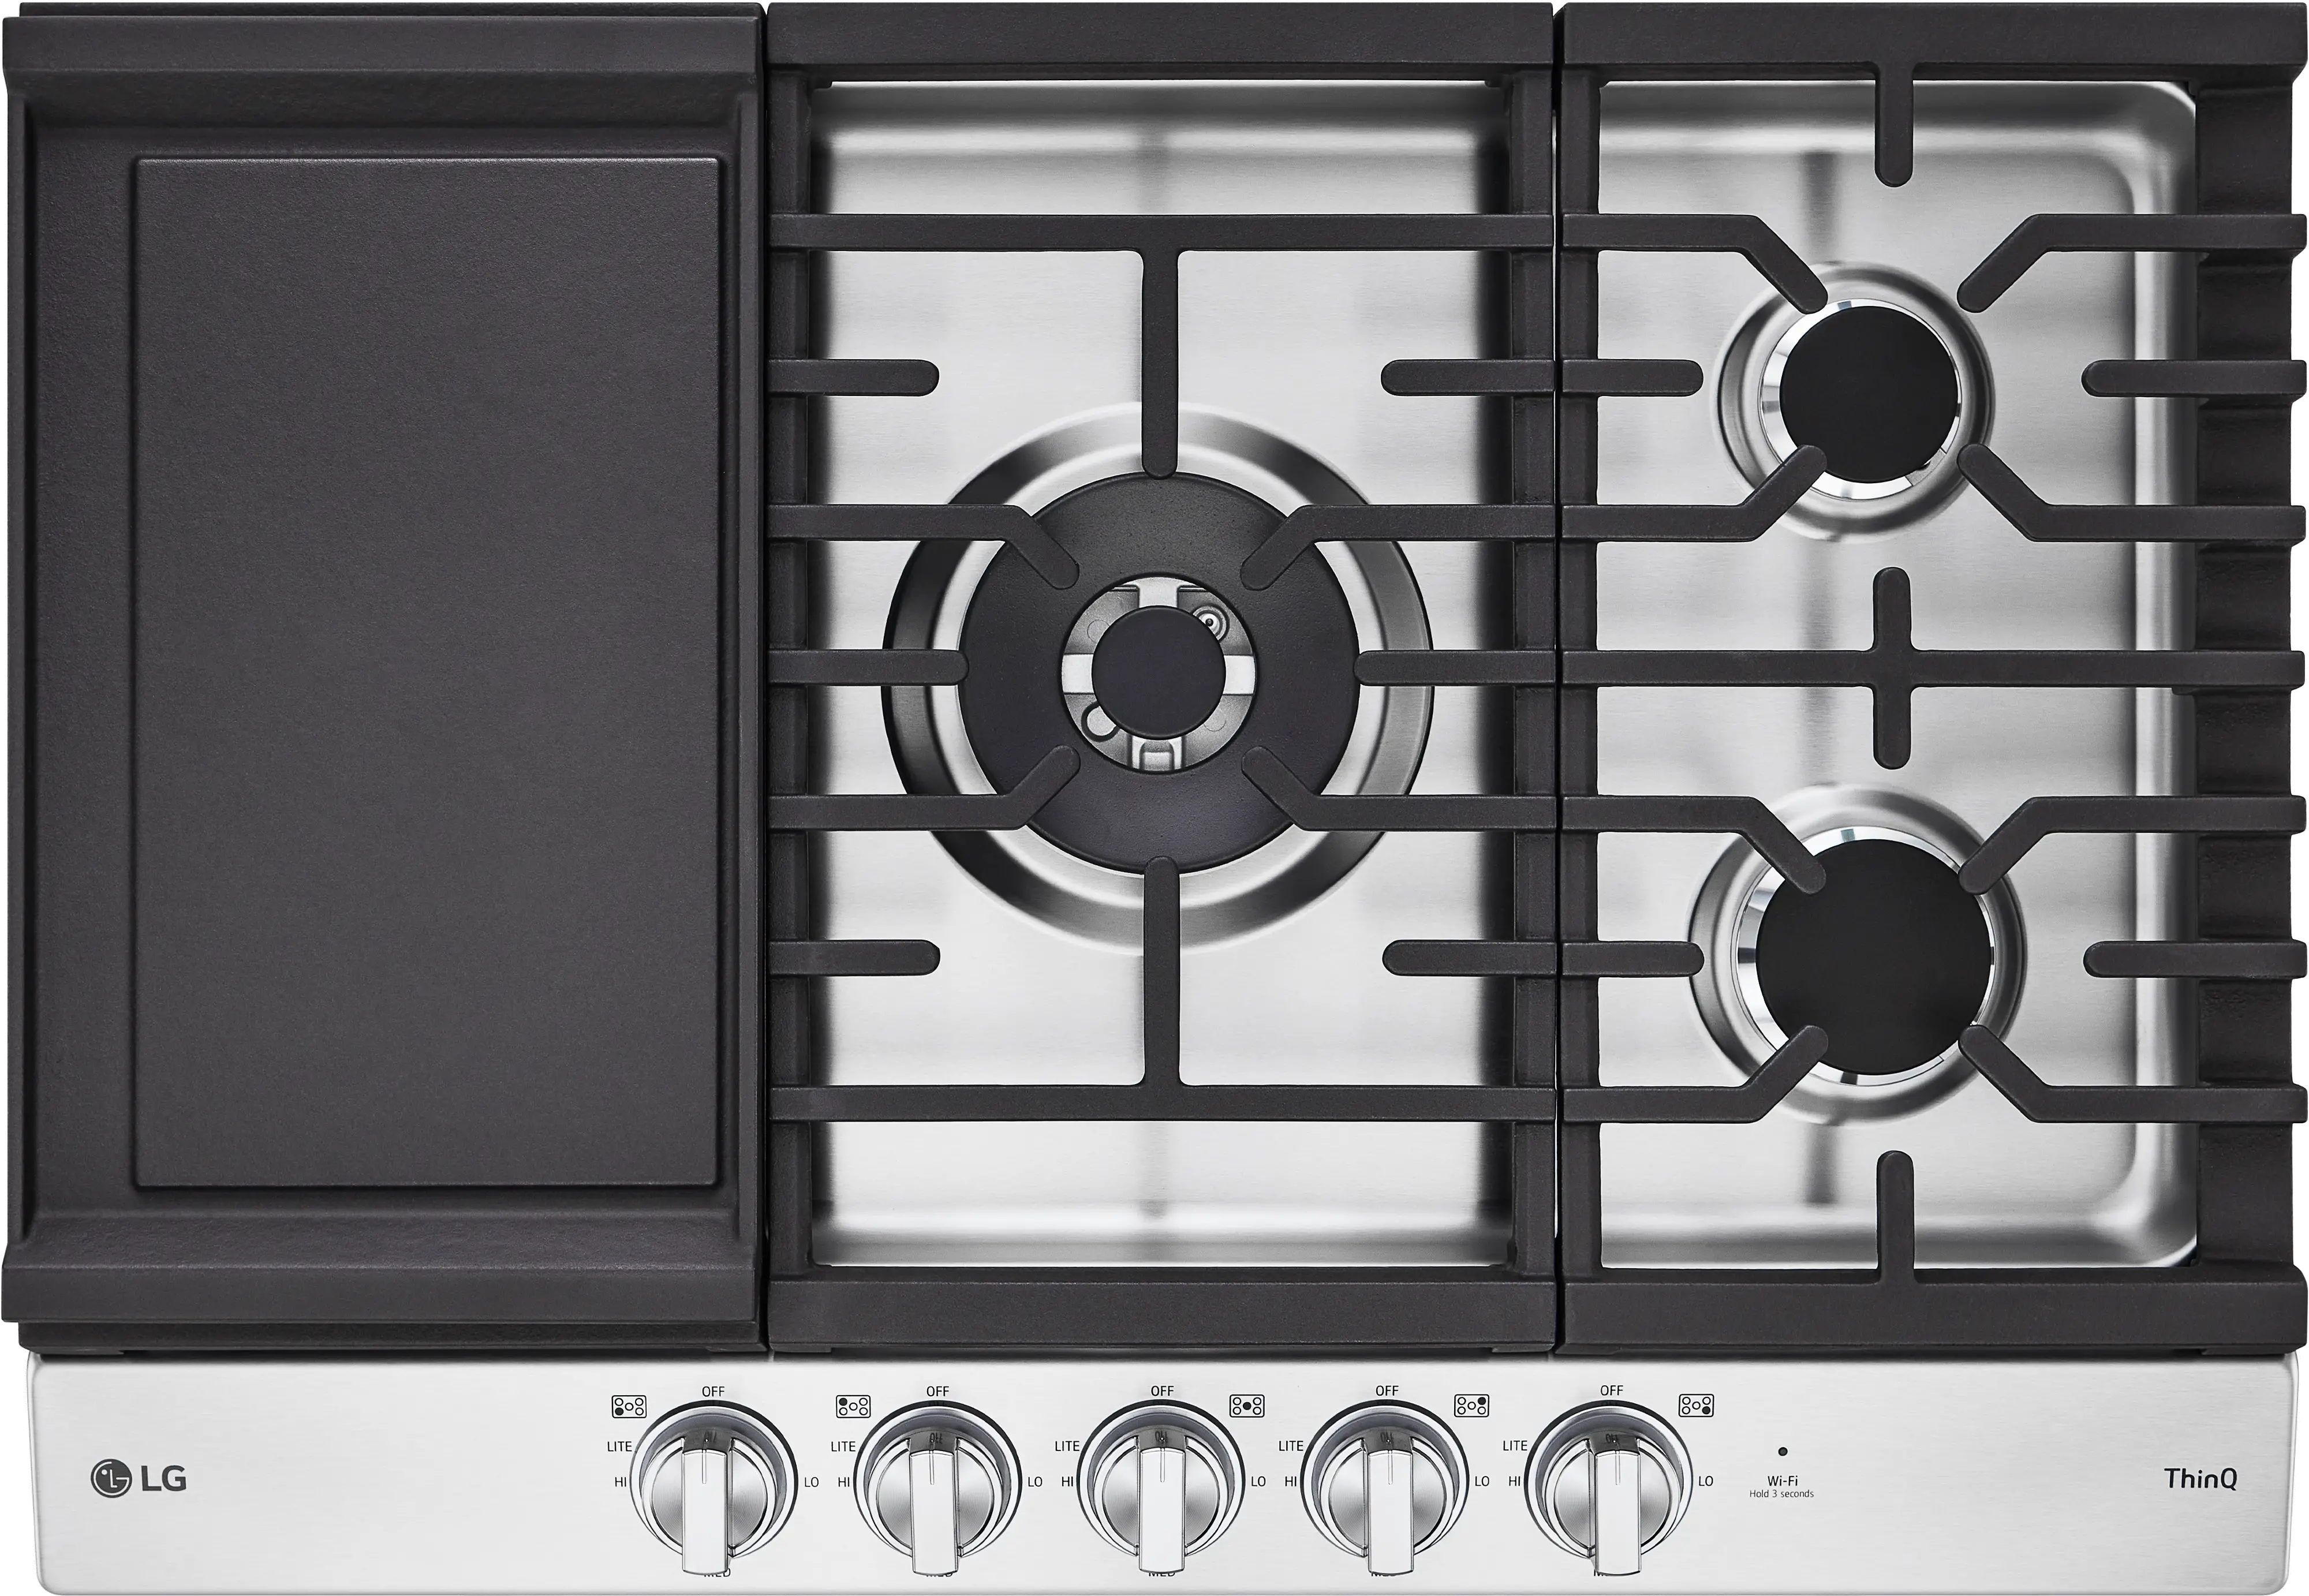 https://static.rcwilley.com/products/113033478/LG-30-Inch-Gas-Cooktop-with-Griddle---Stainless-Steel-rcwilley-image1.webp